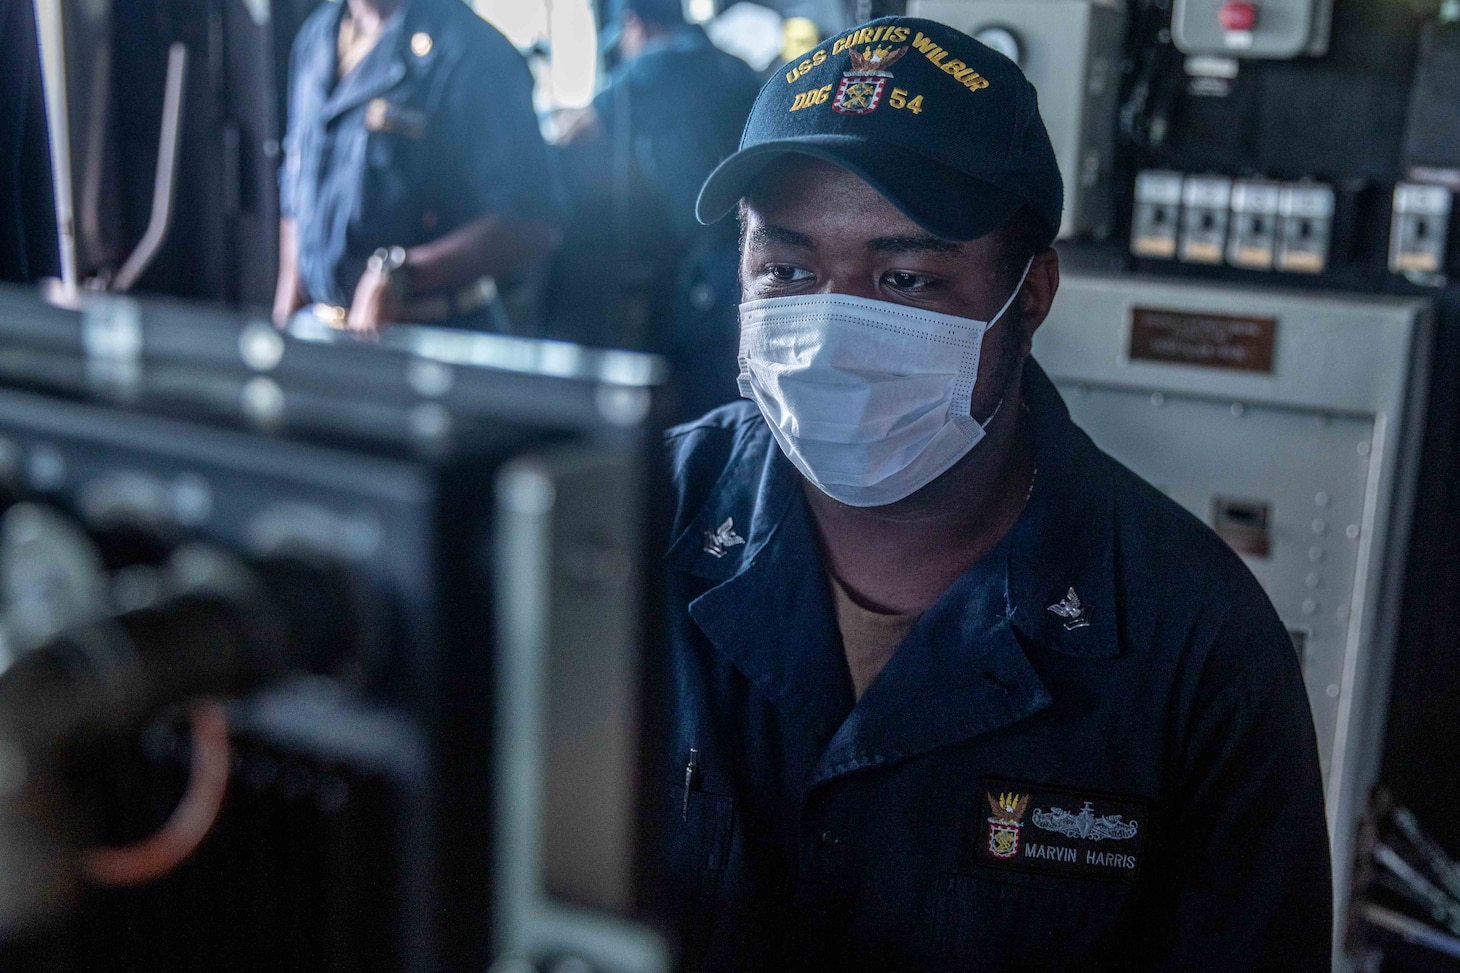 TAIWAN STRAIT (May 18, 2021) – Gunner’s Mate 2nd Class Marvin Harris, from Chicago, stands watch on the bridge of the Arleigh Burke-class guided-missile destroyer USS Curtis Wilbur (DDG 54) as the ship conducts routine operations. Curtis Wilbur is assigned to Commander, Task Force 71/Destroyer Squadron (DESRON) 15, the Navy’s largest forward DESRON and the U.S. 7th Fleet’s principal surface force. (U.S. Navy photo by Mass Communication Specialist 3rd Class Zenaida Roth)